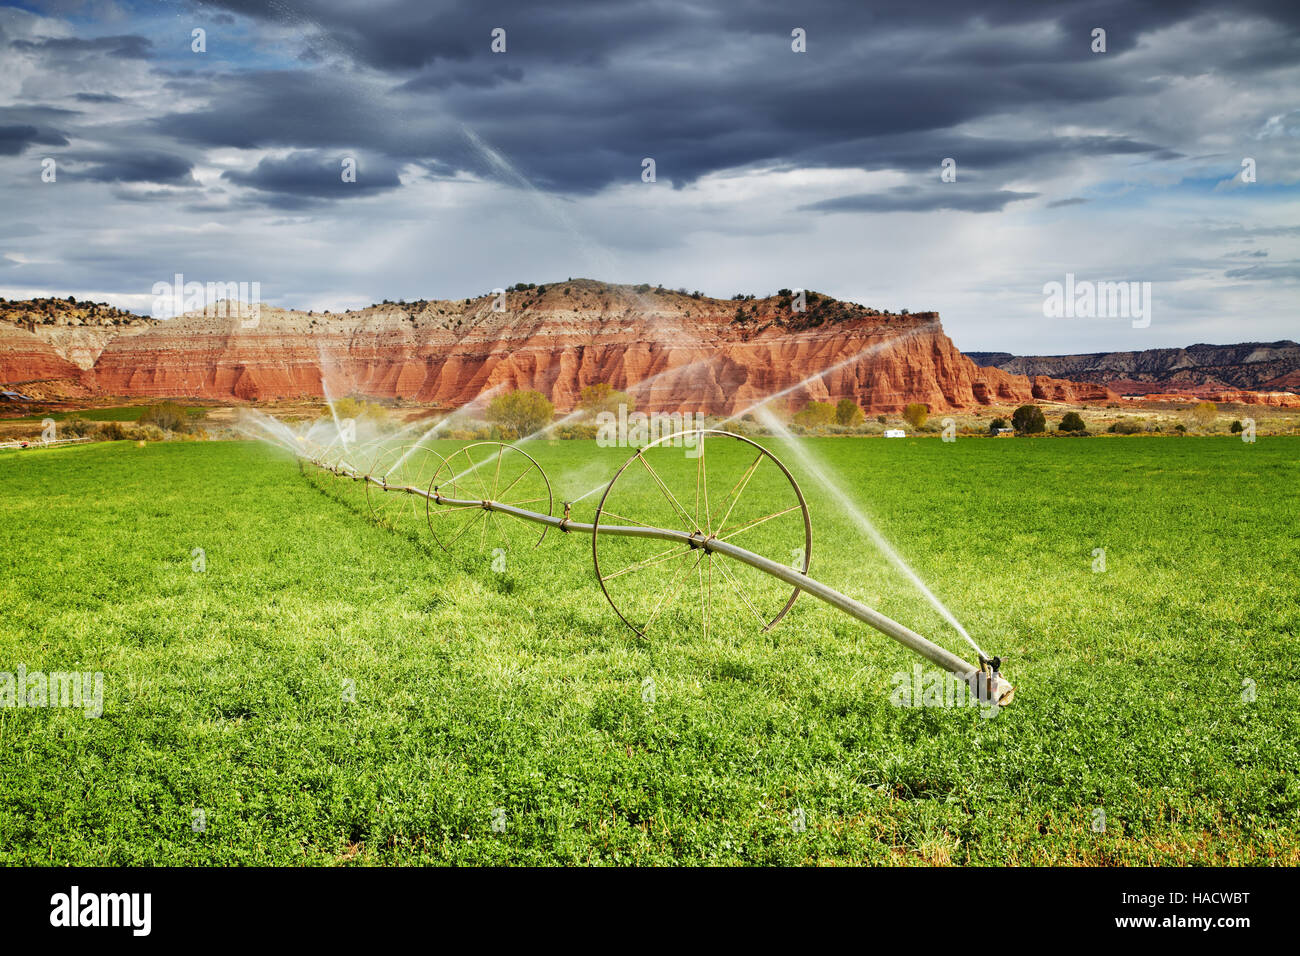 Irrigated agriculture in desert, farm in Utah, USA Stock Photo